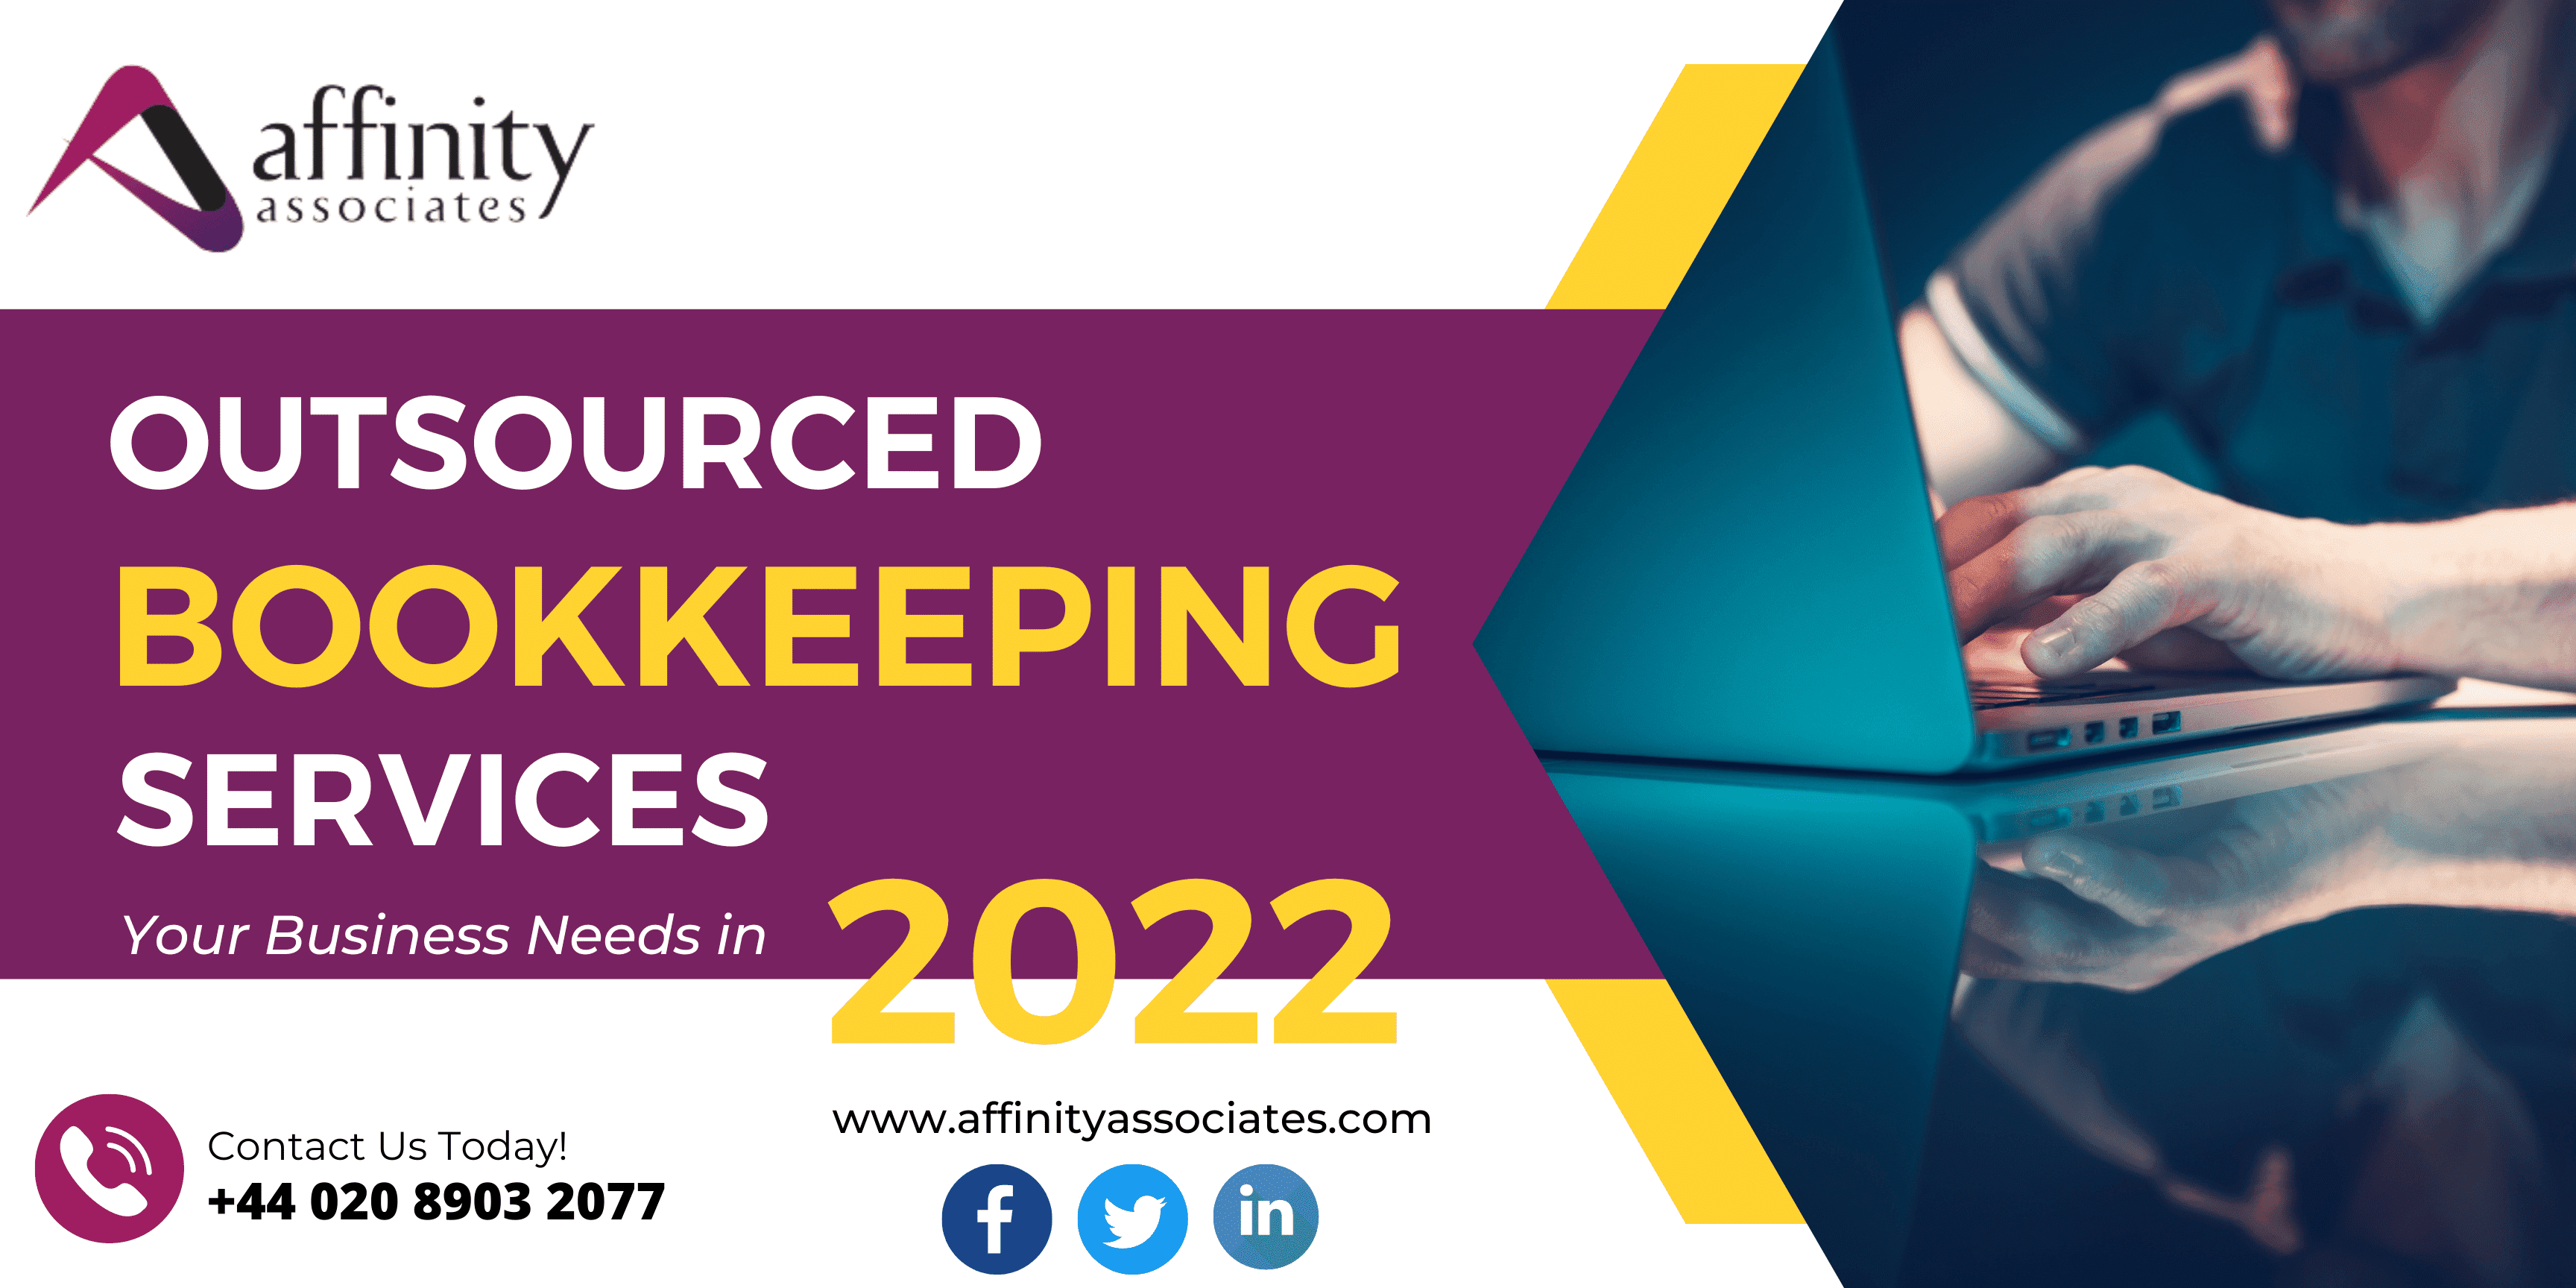 The Outsourced Bookkeeping Services Your Business Needs in 2022